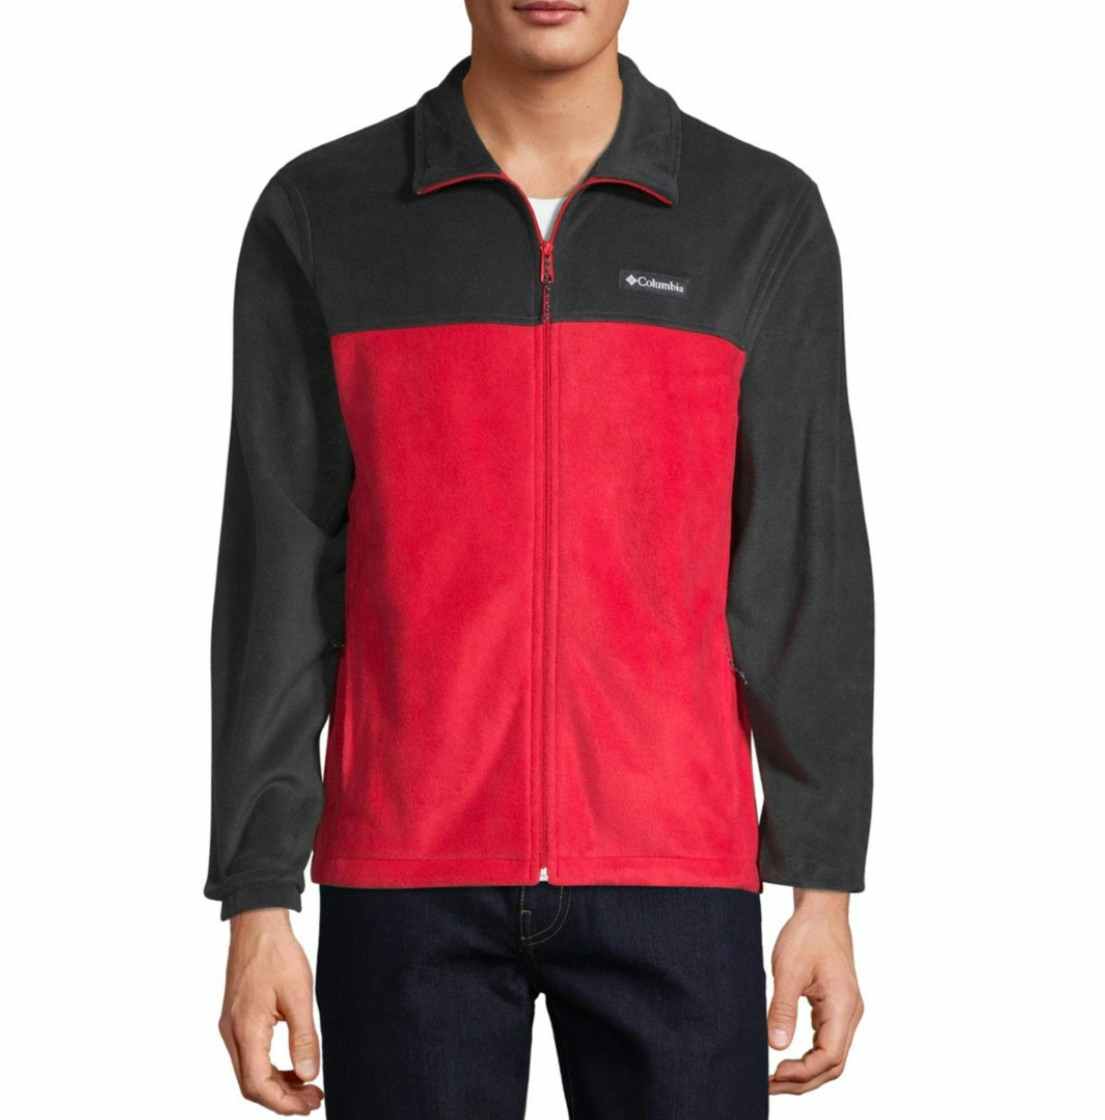 jcpenney-columbia-jacket-2022-4